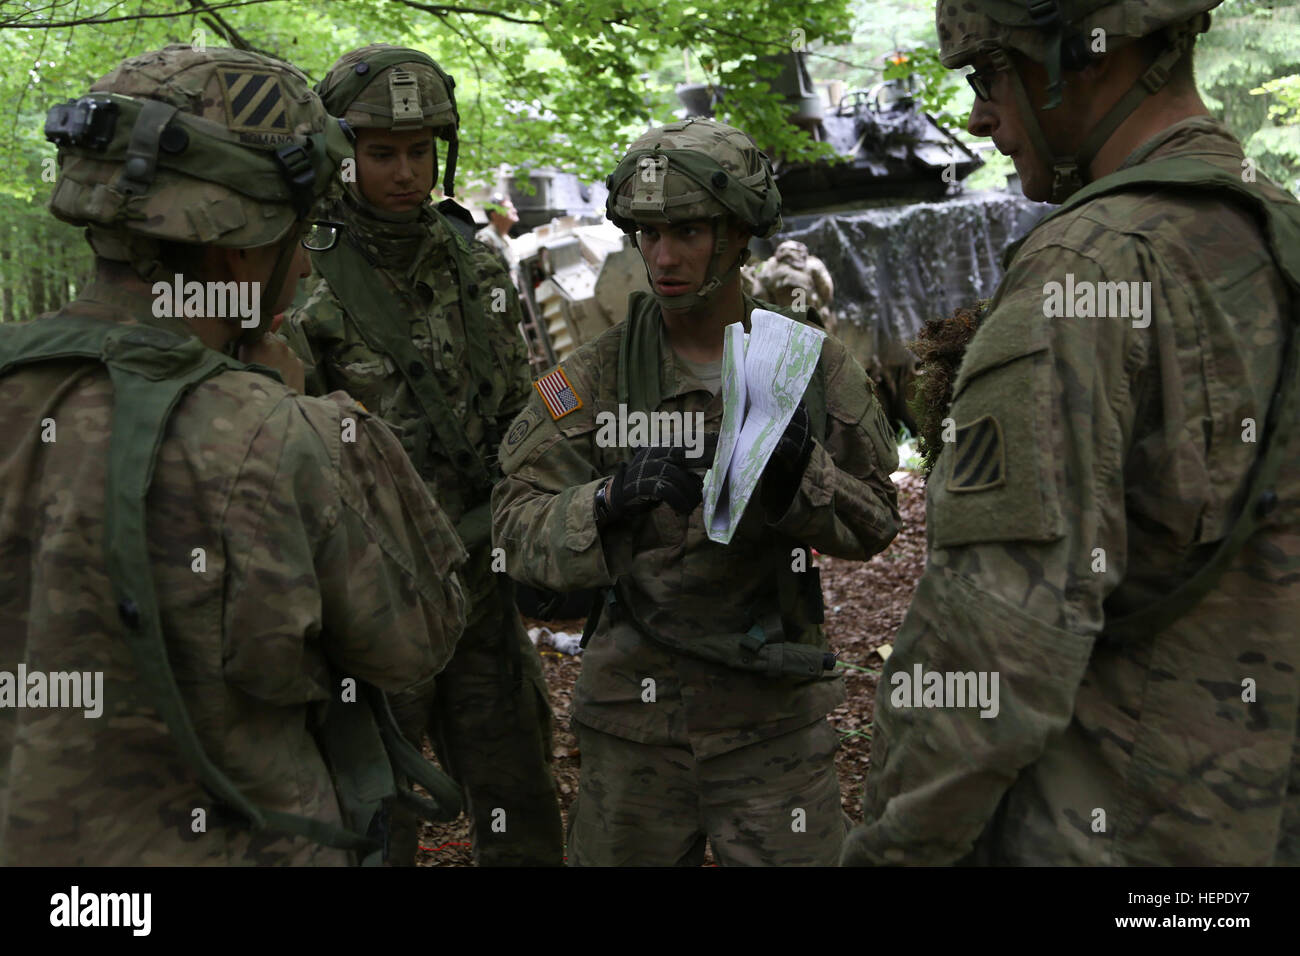 U.S. Soldiers of the 3rd Battalion, 69th Armor Regiment, 1st Armored Brigade Combat Team, 3rd Infantry Division review a map in preparation to build a sand table during exercise Combined Resolve IV at the U.S. Army’s Joint Multinational Readiness Center in Hohenfels, Germany, June 2, 2015. Combined Resolve IV is an Army Europe directed exercise training a multinational brigade and enhancing interoperability with allies and partner nations. Combined Resolve trains on unified land operations against a complex threat while improving the combat readiness of all participants. The Combined Resolve s Stock Photo